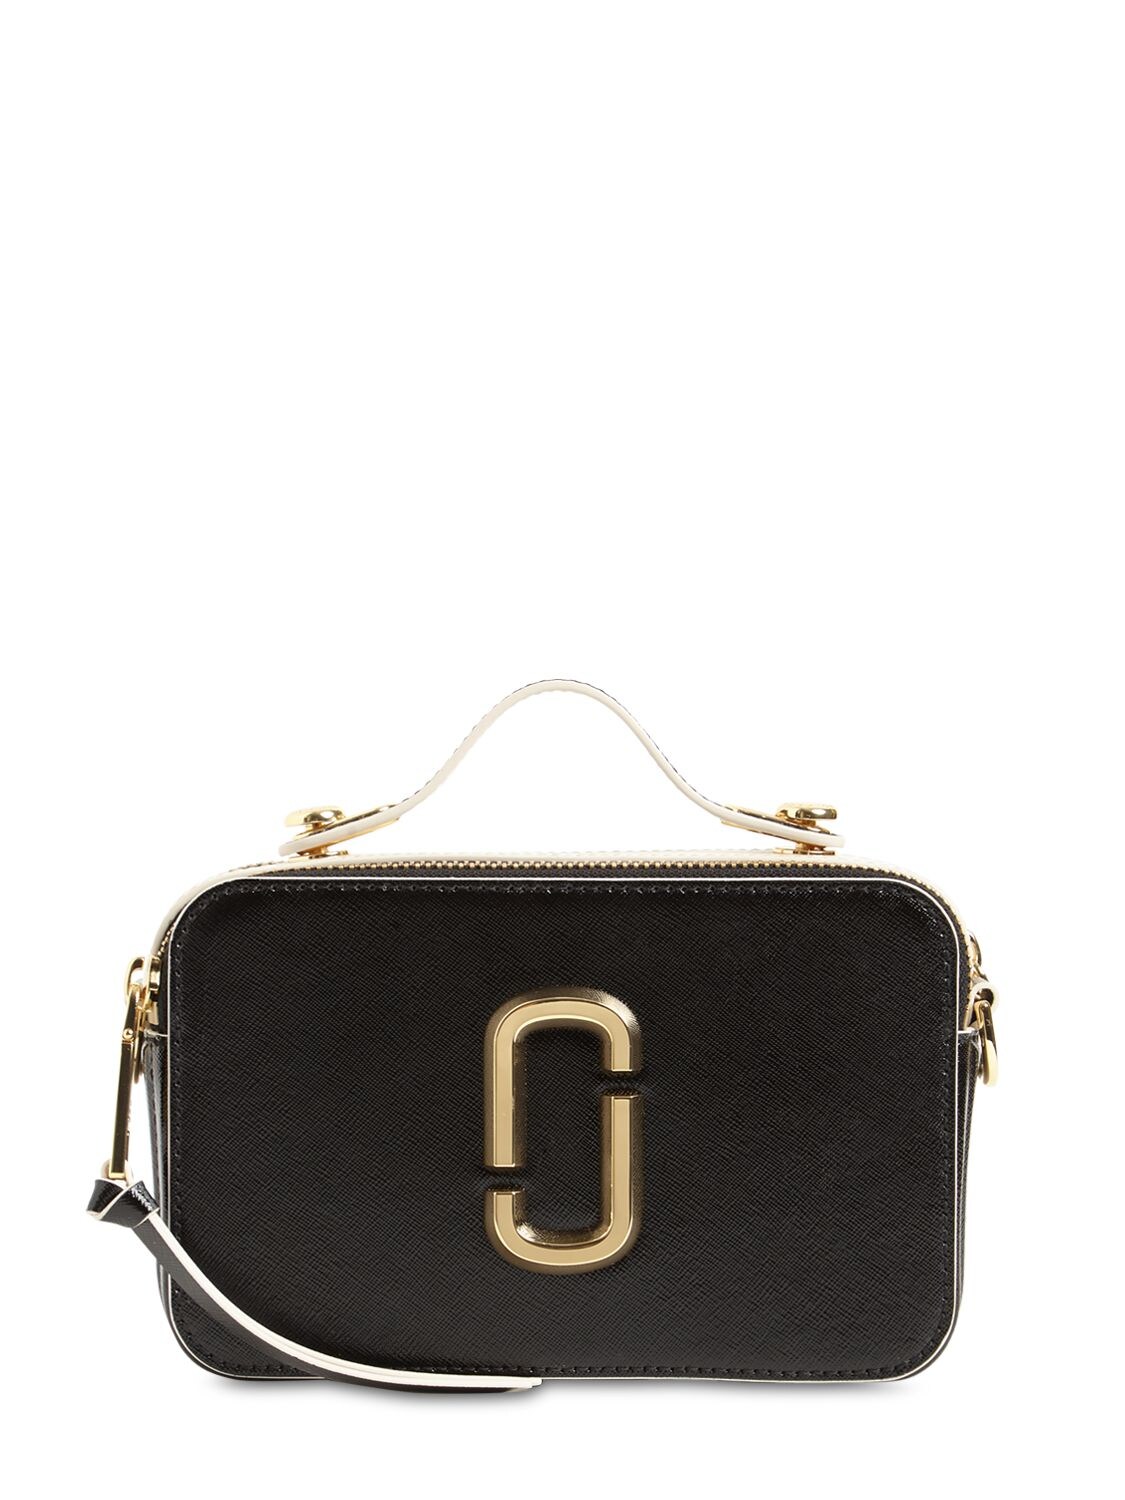 Marc Jacobs Large Snapshot Leather Bag In Black